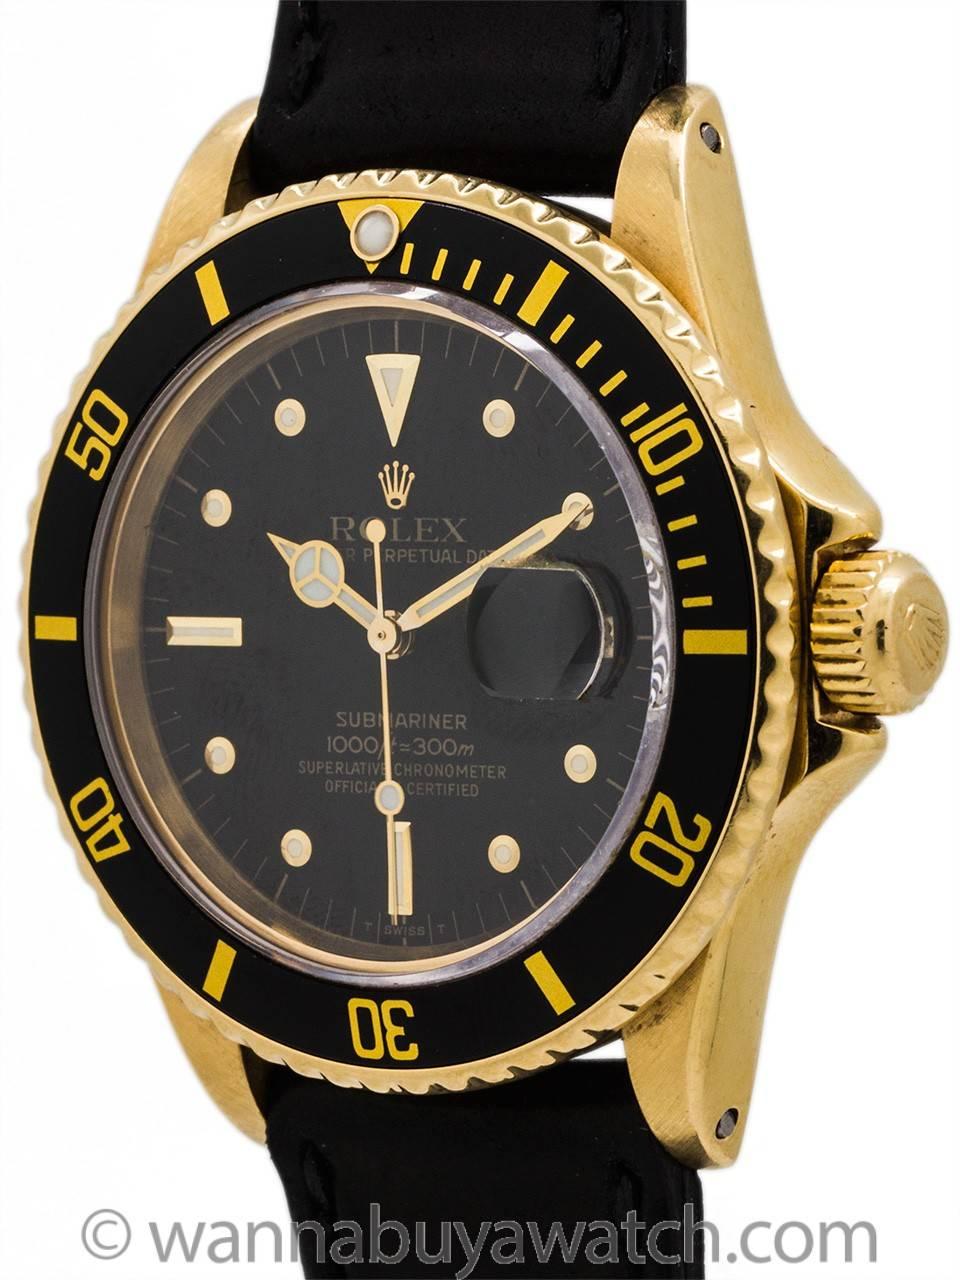 Rolex Submariner 18K YG ref 16808 “Transitional Model” serial # 7.4 million circa 1983. Featuring a 40mm diameter case with unidirectional black elapsed time bezel, sapphire crystal, gloss black original dial with applied “nipple” shaped indexes,